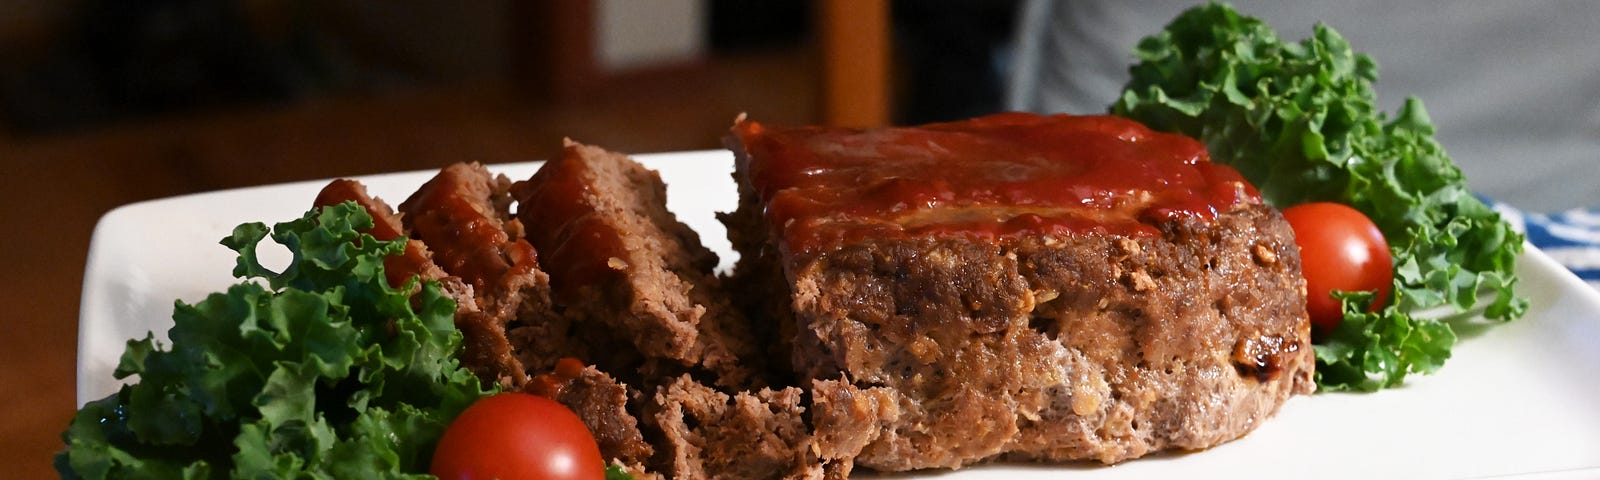 Cooked meatloaf which has been plated, sliced, and garnished.